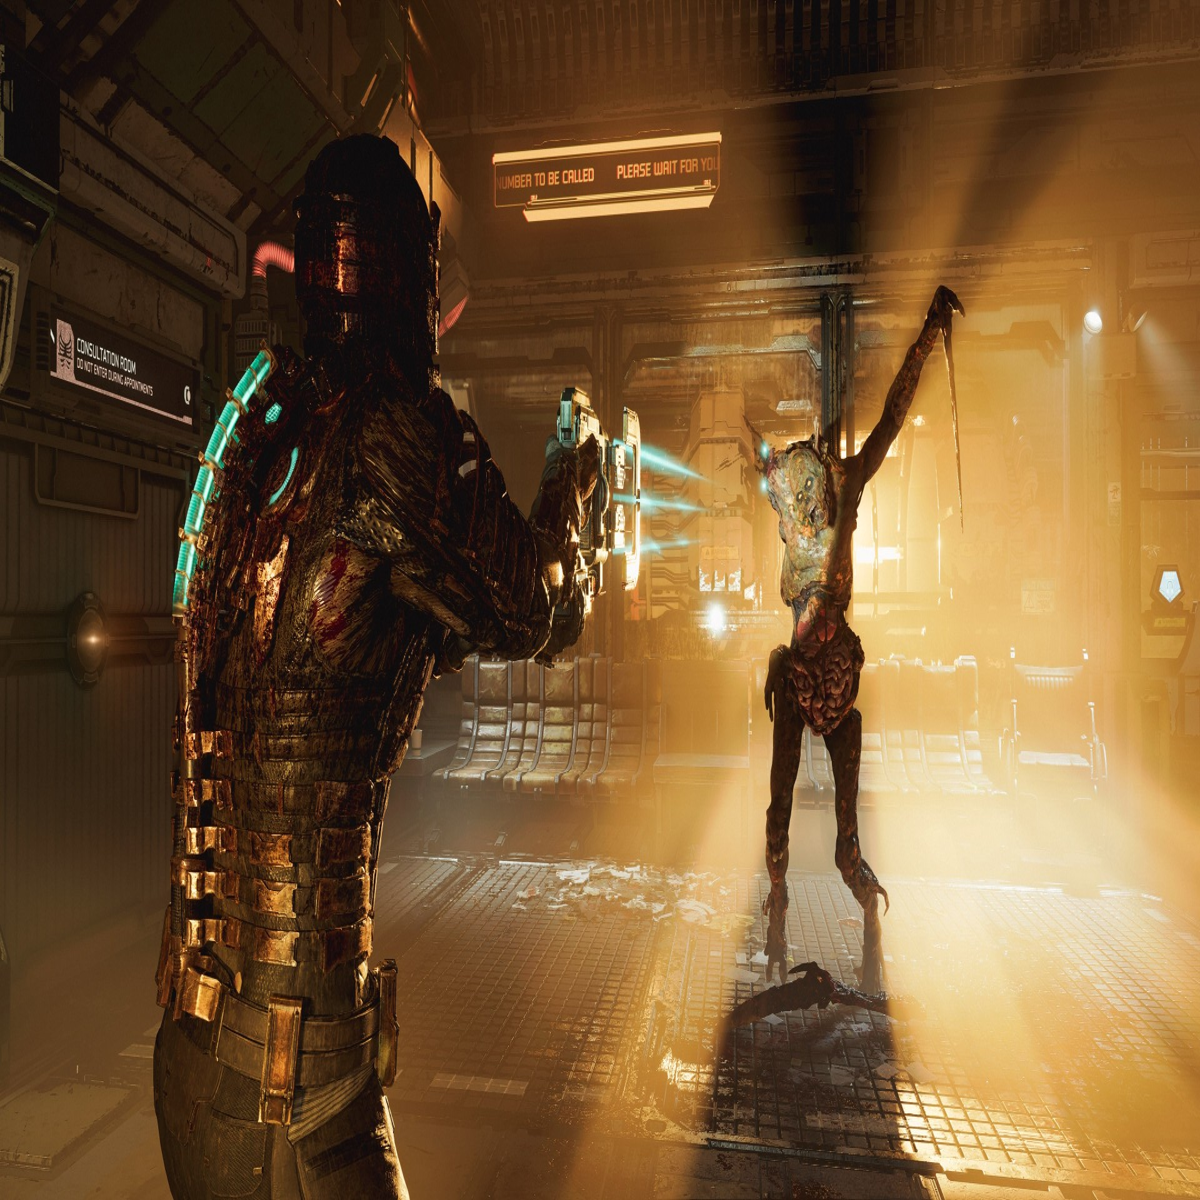 EA announces Dead Space remake: All you need to know - Articles